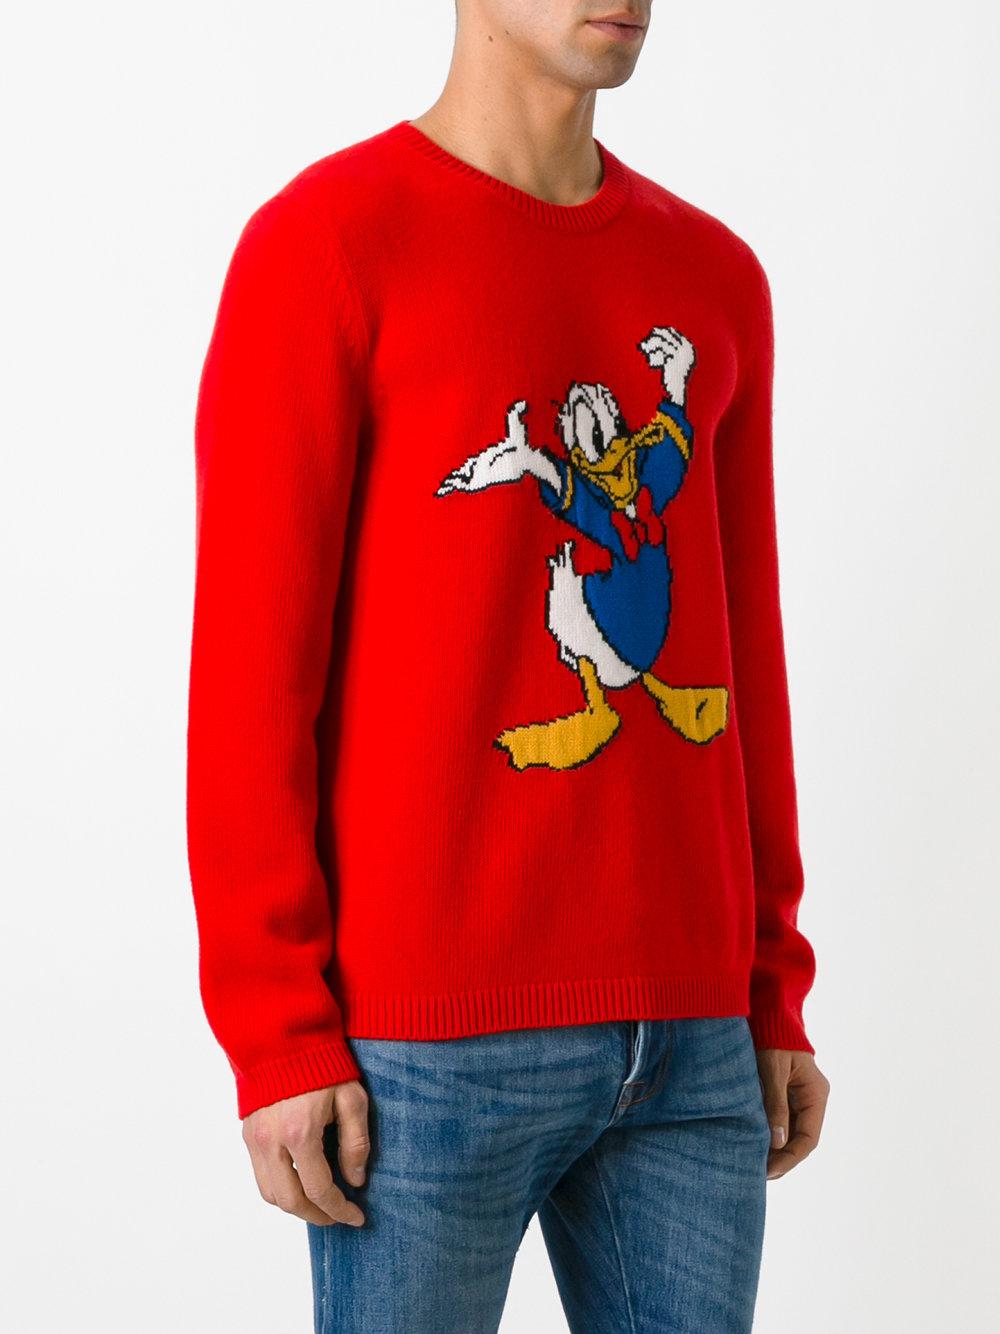 Gucci Wool Sweater With Donald Duck in Red for Men - Lyst